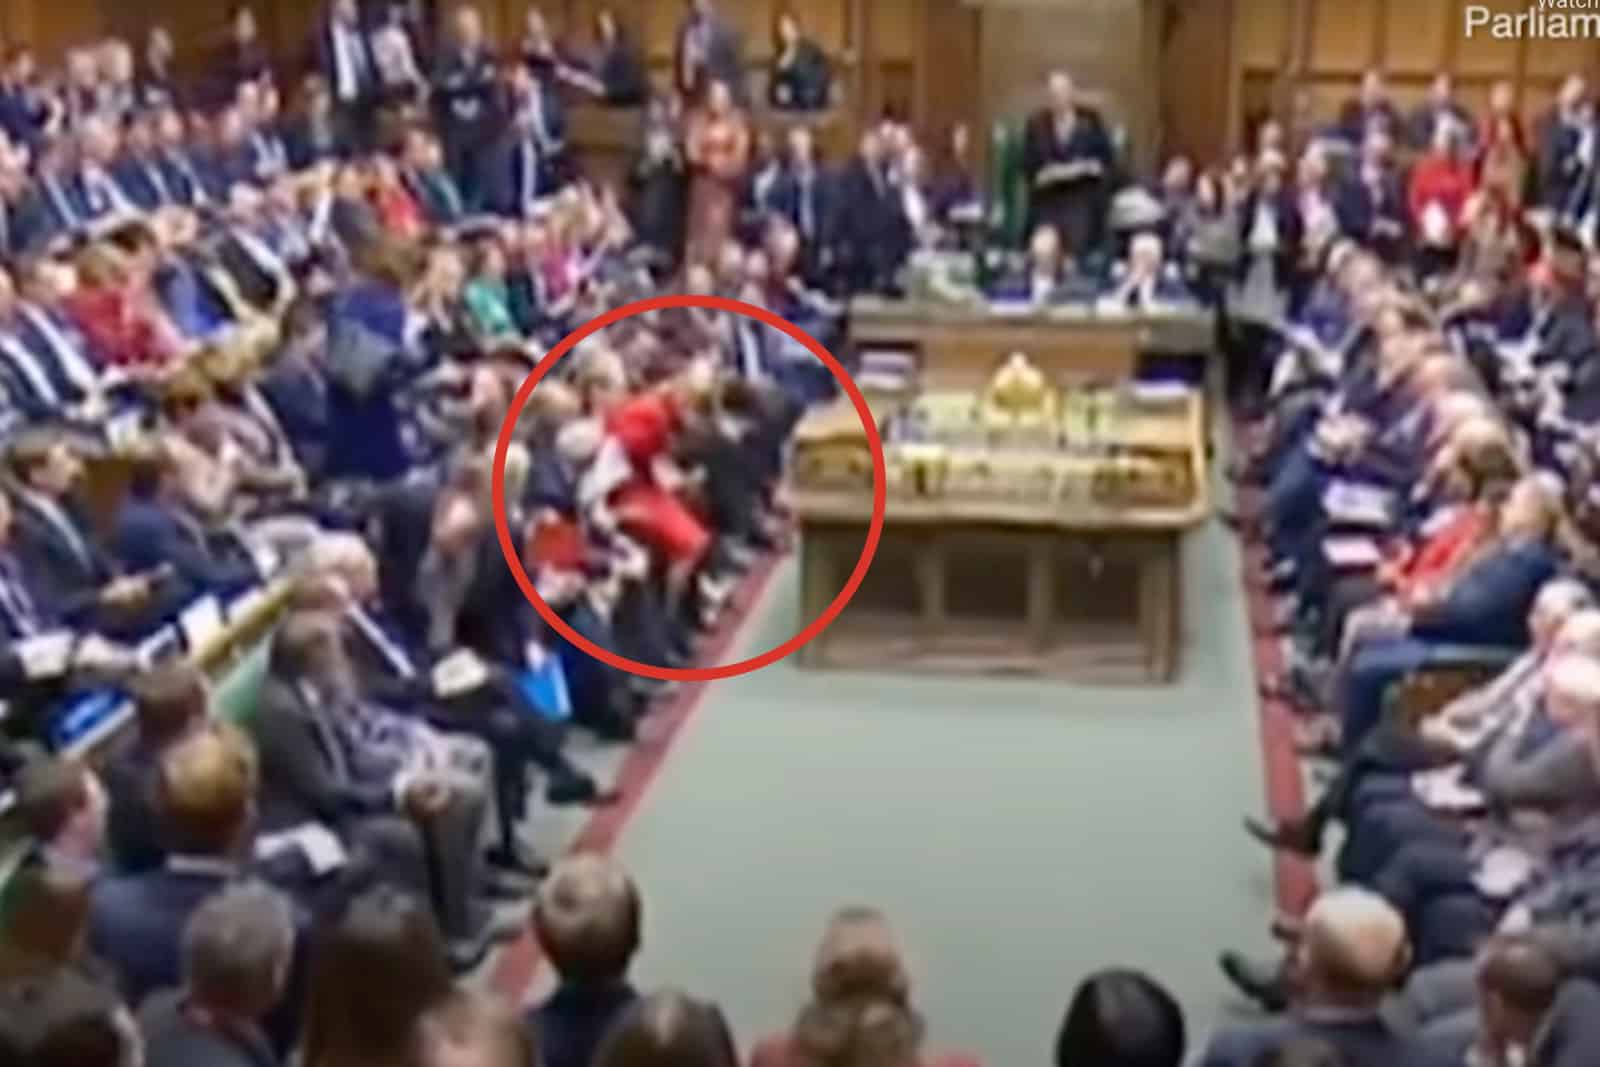 Flashback: To hilarious moment Liz Truss sat on an MP in the Commons